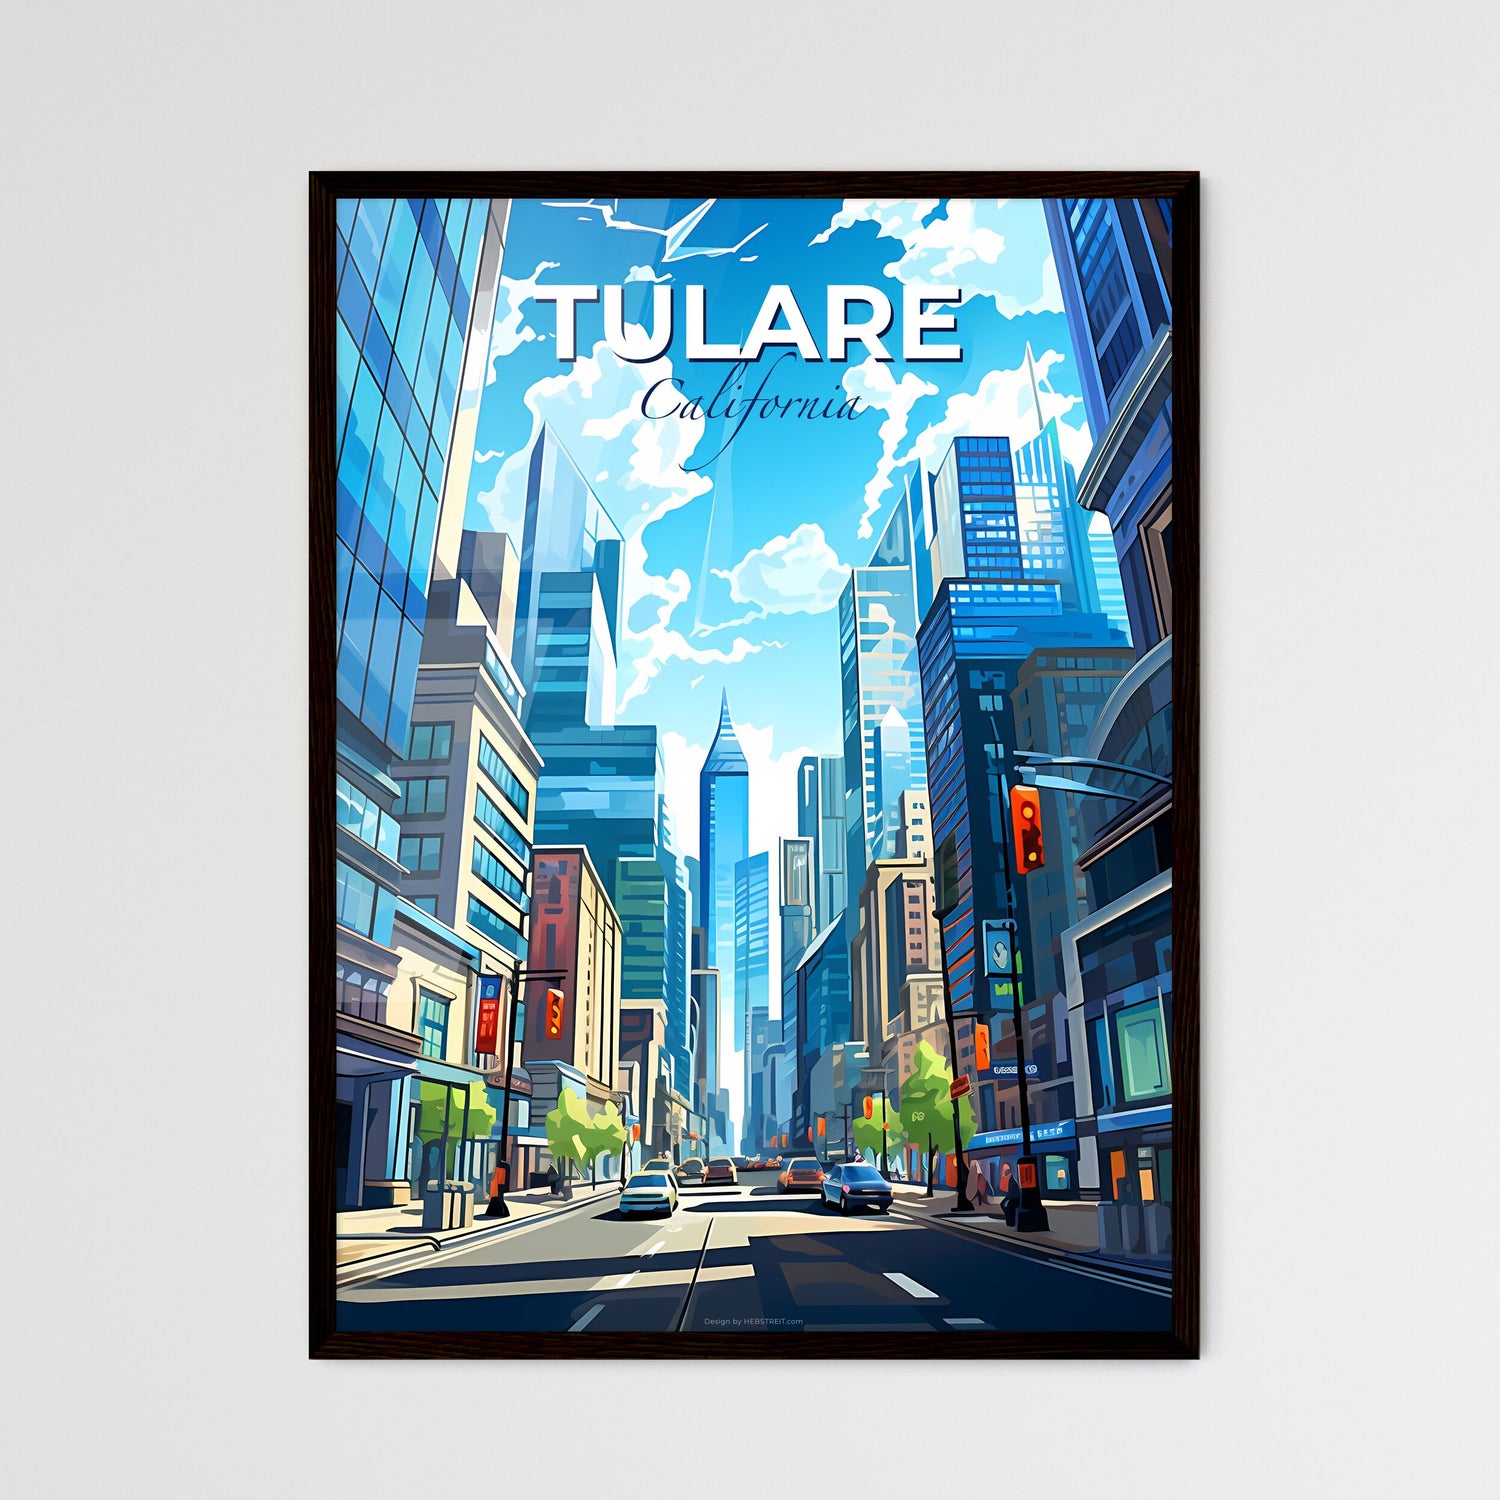 Tulare, California, A Poster of a city street with tall buildings Default Title